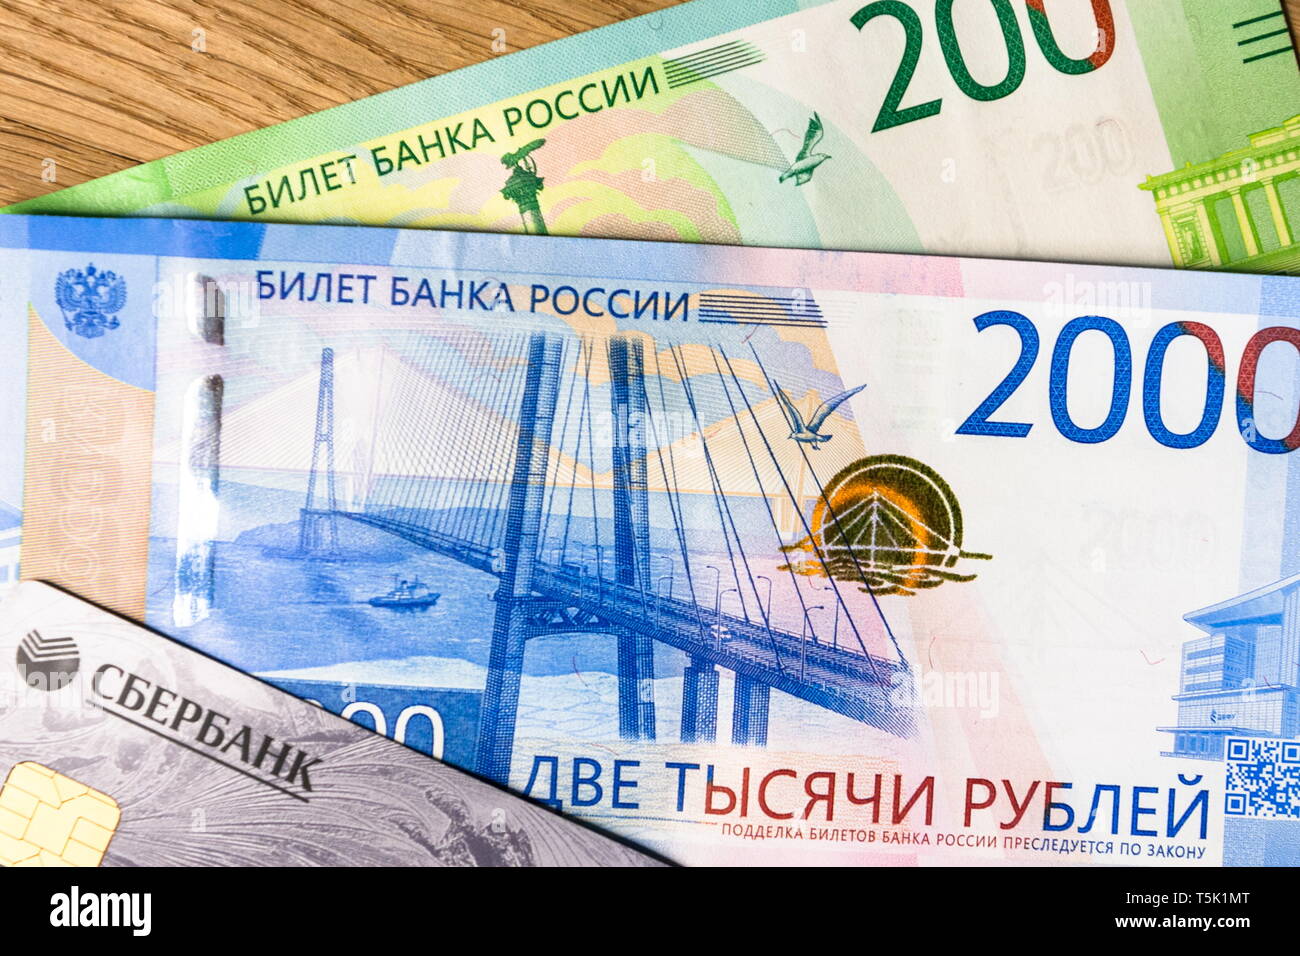 Money and sberbank credit card on a woody background. Rubles Stock Photo